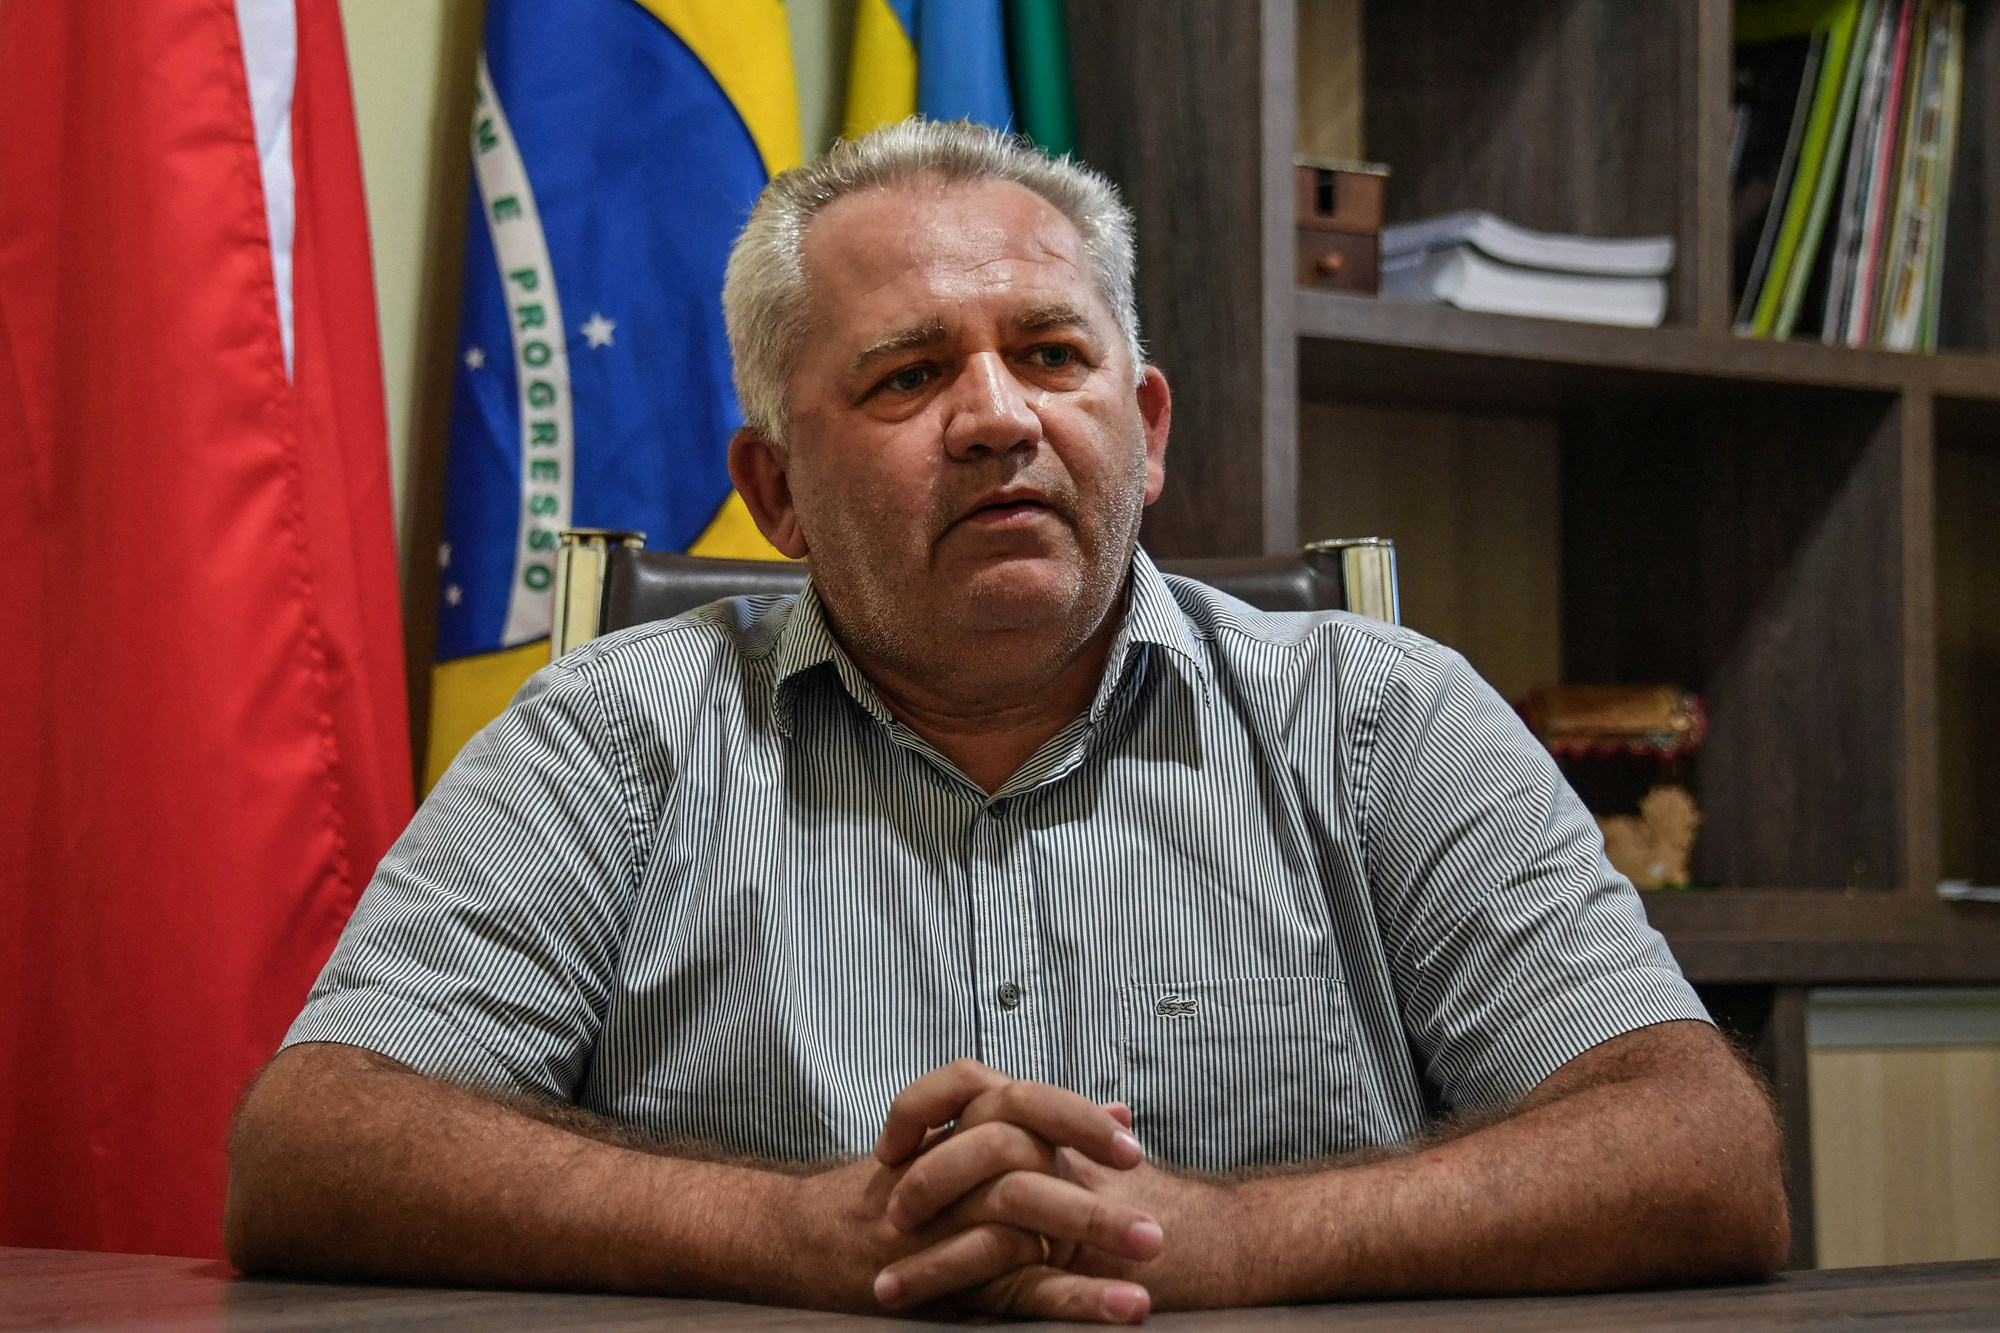 Itaituba Mayor, Valmir Climaco de Aguiar, speaks durig an interview with AFP in Itaituba, Para state, Brazil, in the Amazon rainforest, on September 9, 2019. - The BR230 and BR163 are major transport routes in Brazil that have played a key role in the development and destruction of the world's largest rainforest, now being ravaged by fires. (Photo by NELSON ALMEIDA / AFP) (Photo by NELSON ALMEIDA/AFP via Getty Images)